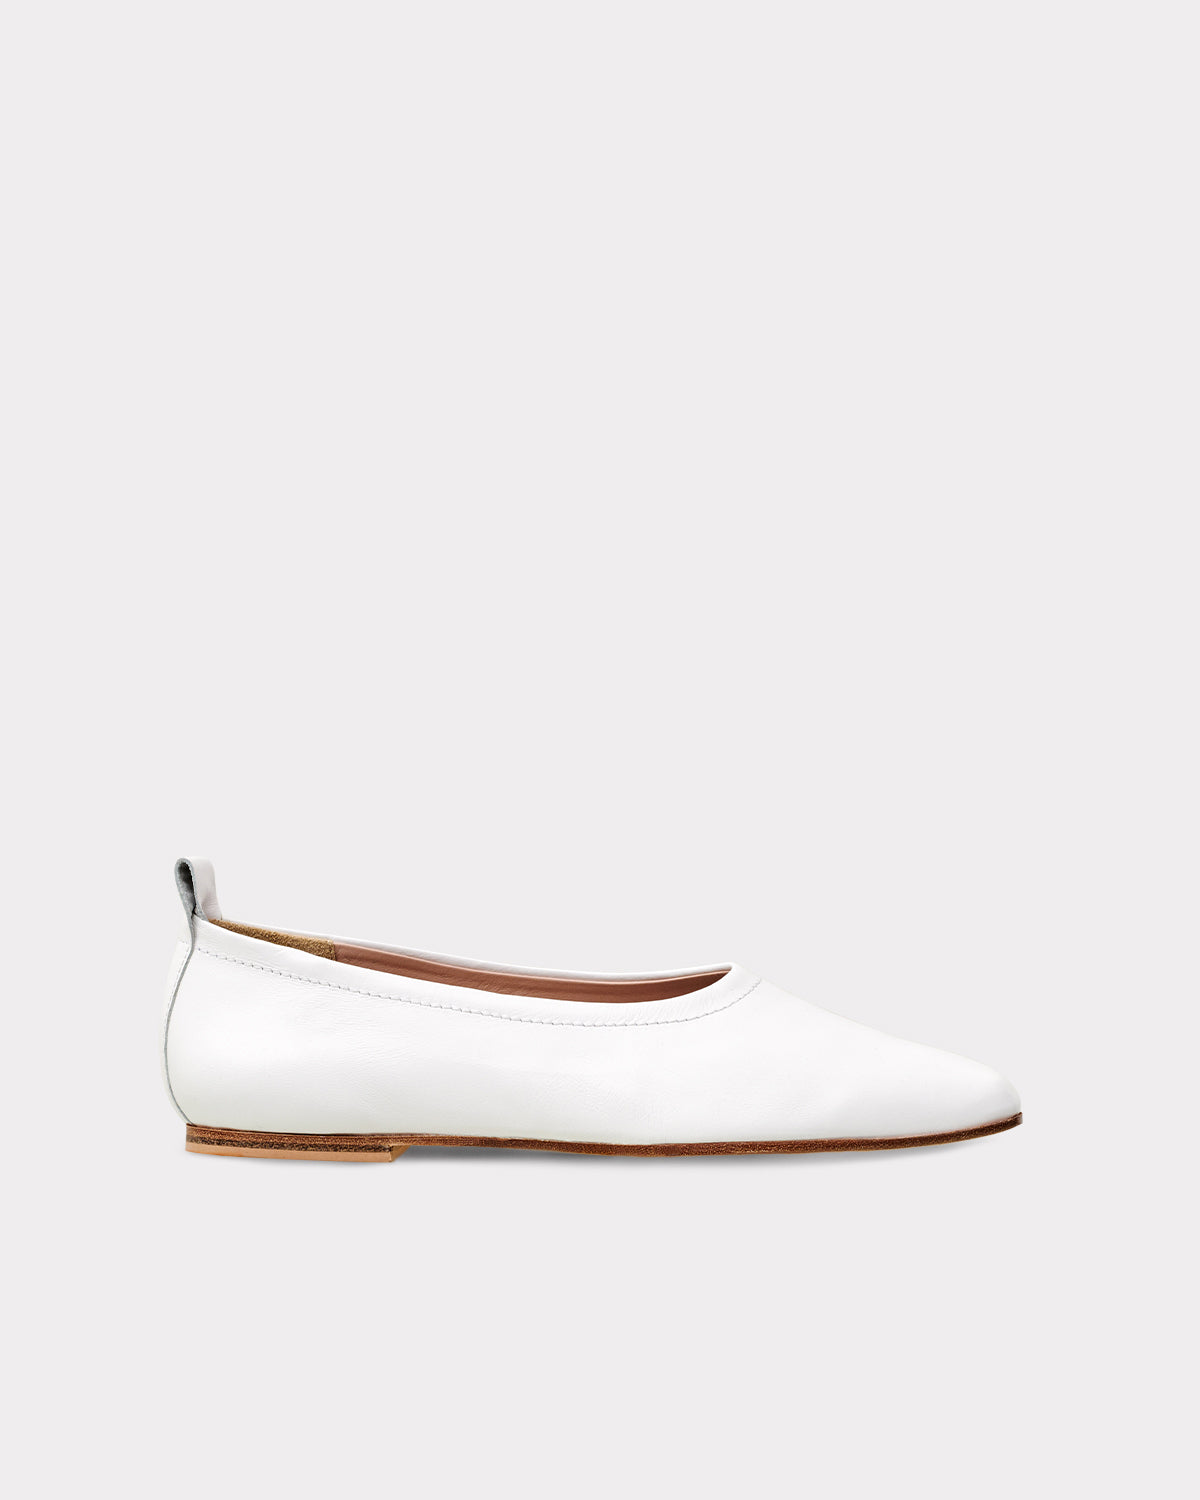 classic white leather flats made from eco friendly materials